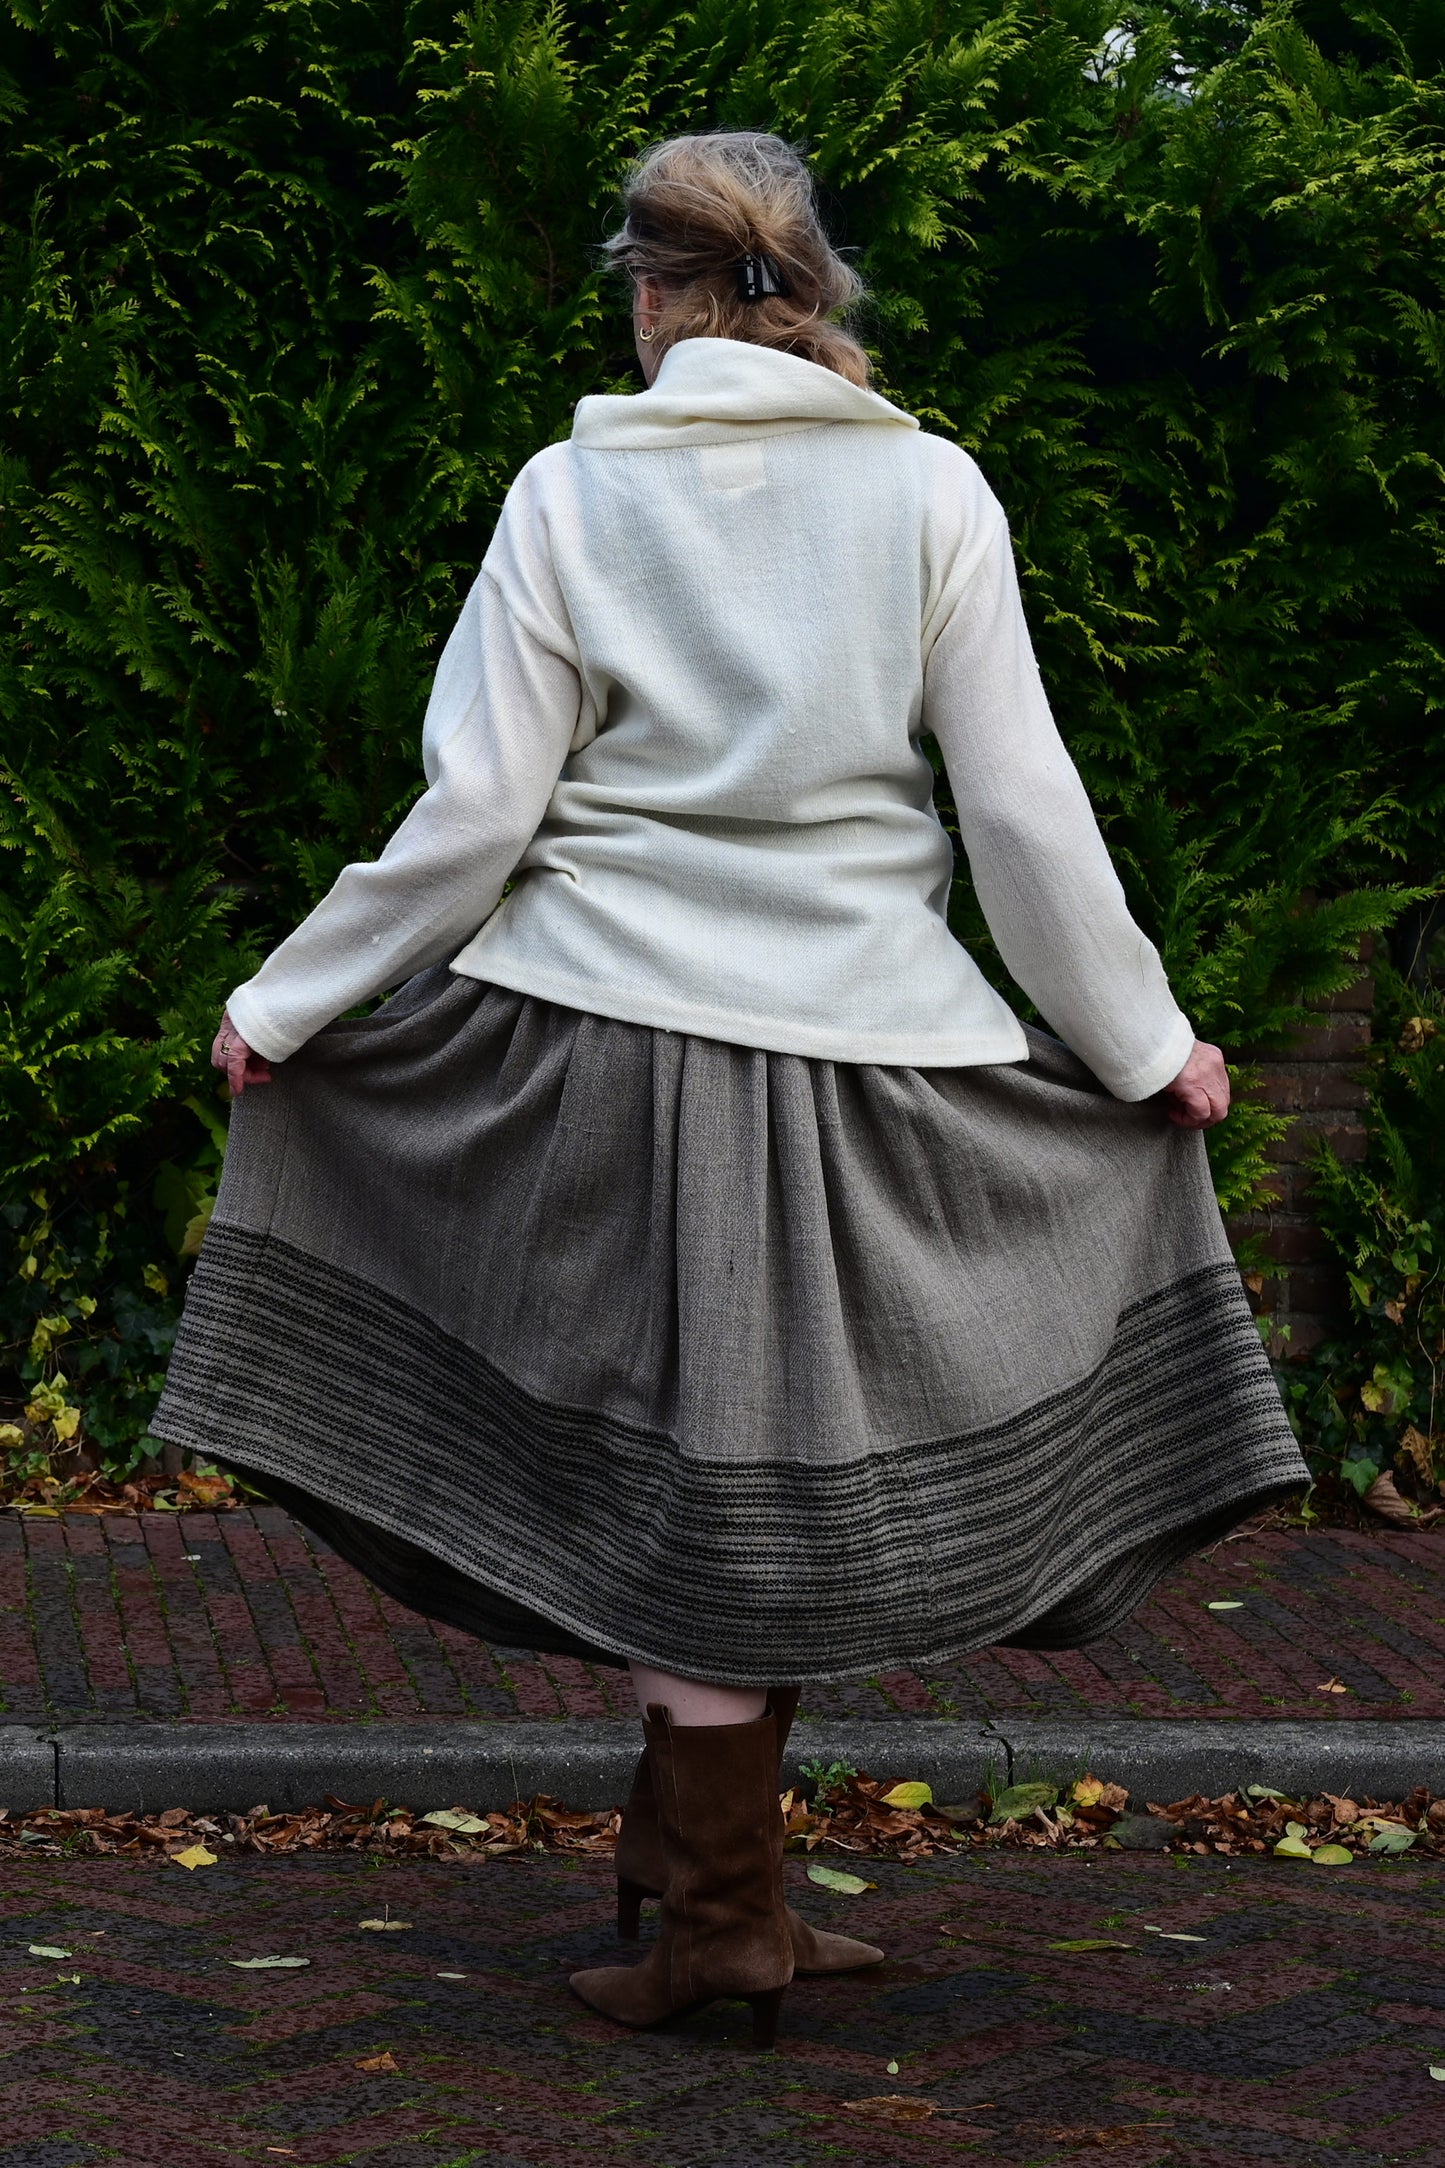 Standing back pose of a middle aged female model on a european street wearing an ivory white woolen sweater top and gathered skirt made of hand spun and handloom woven natural fabrics by Cotton Rack.